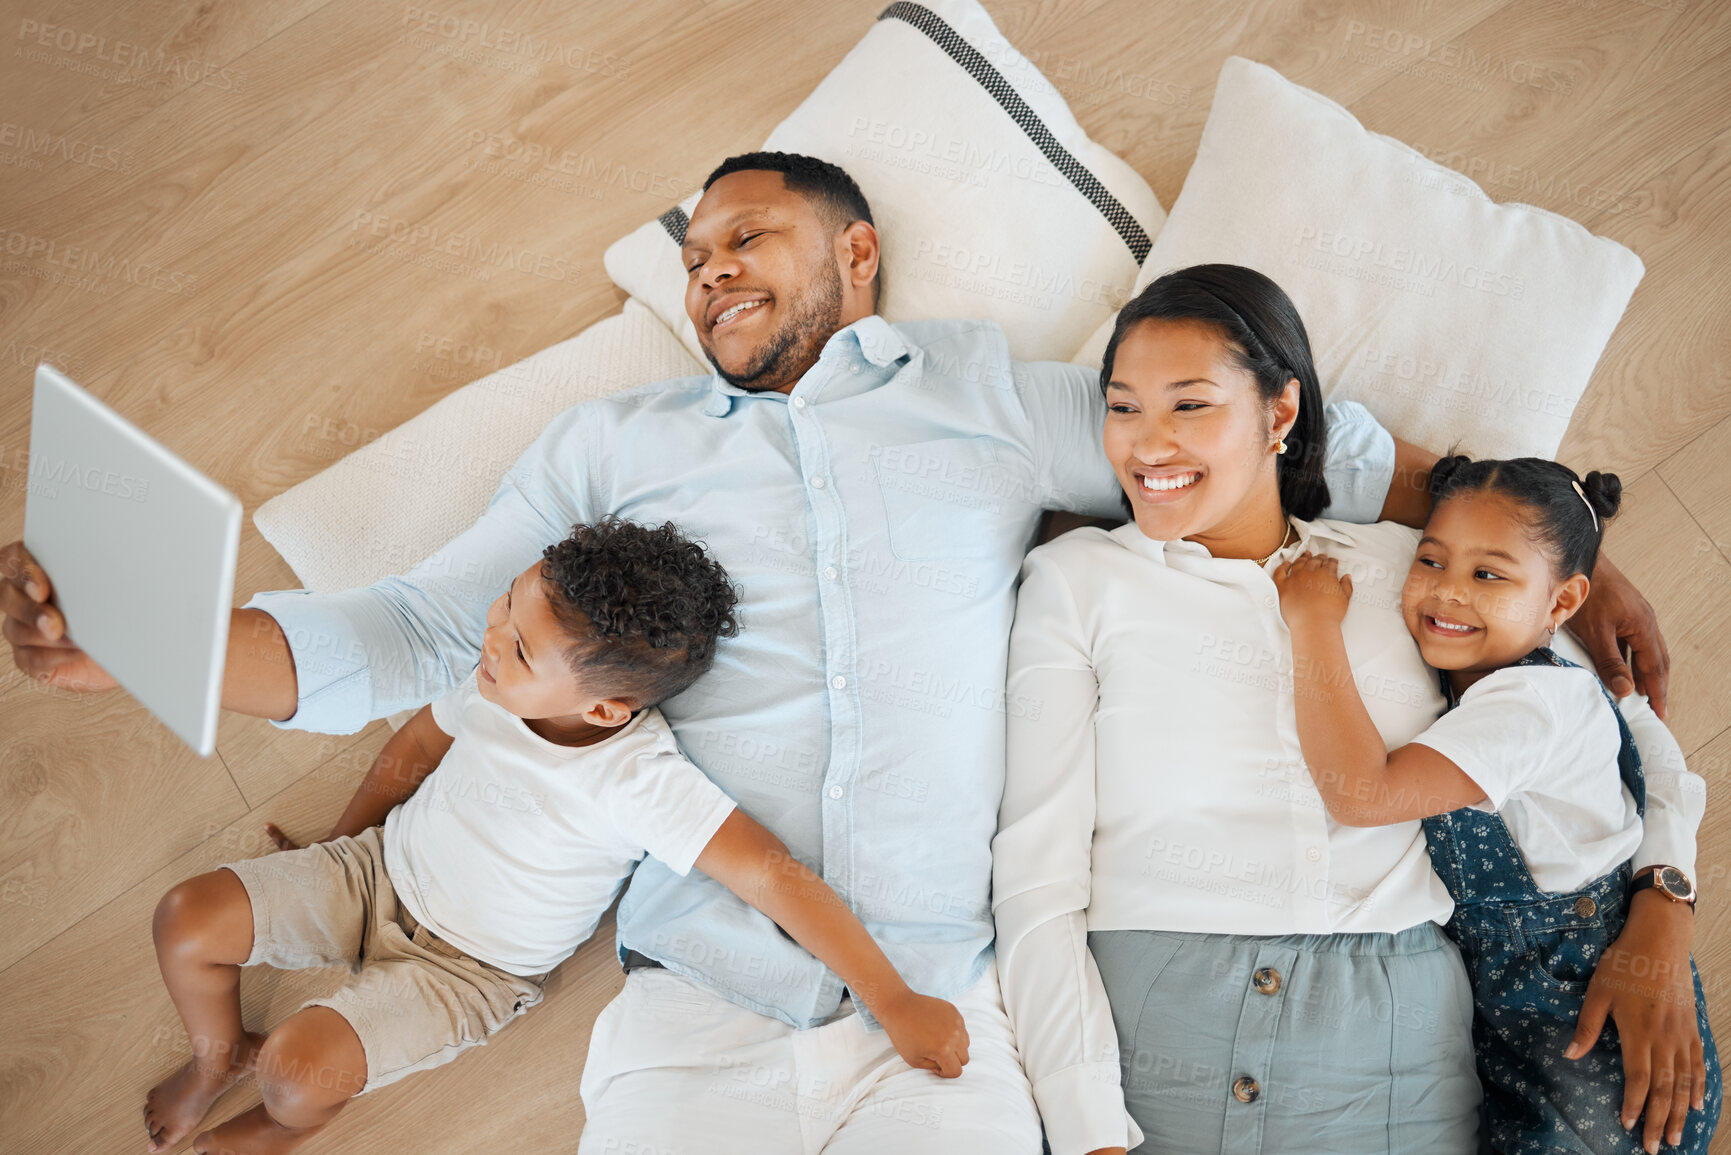 Buy stock photo Shot of a family laying on the floor and using a tablet at home